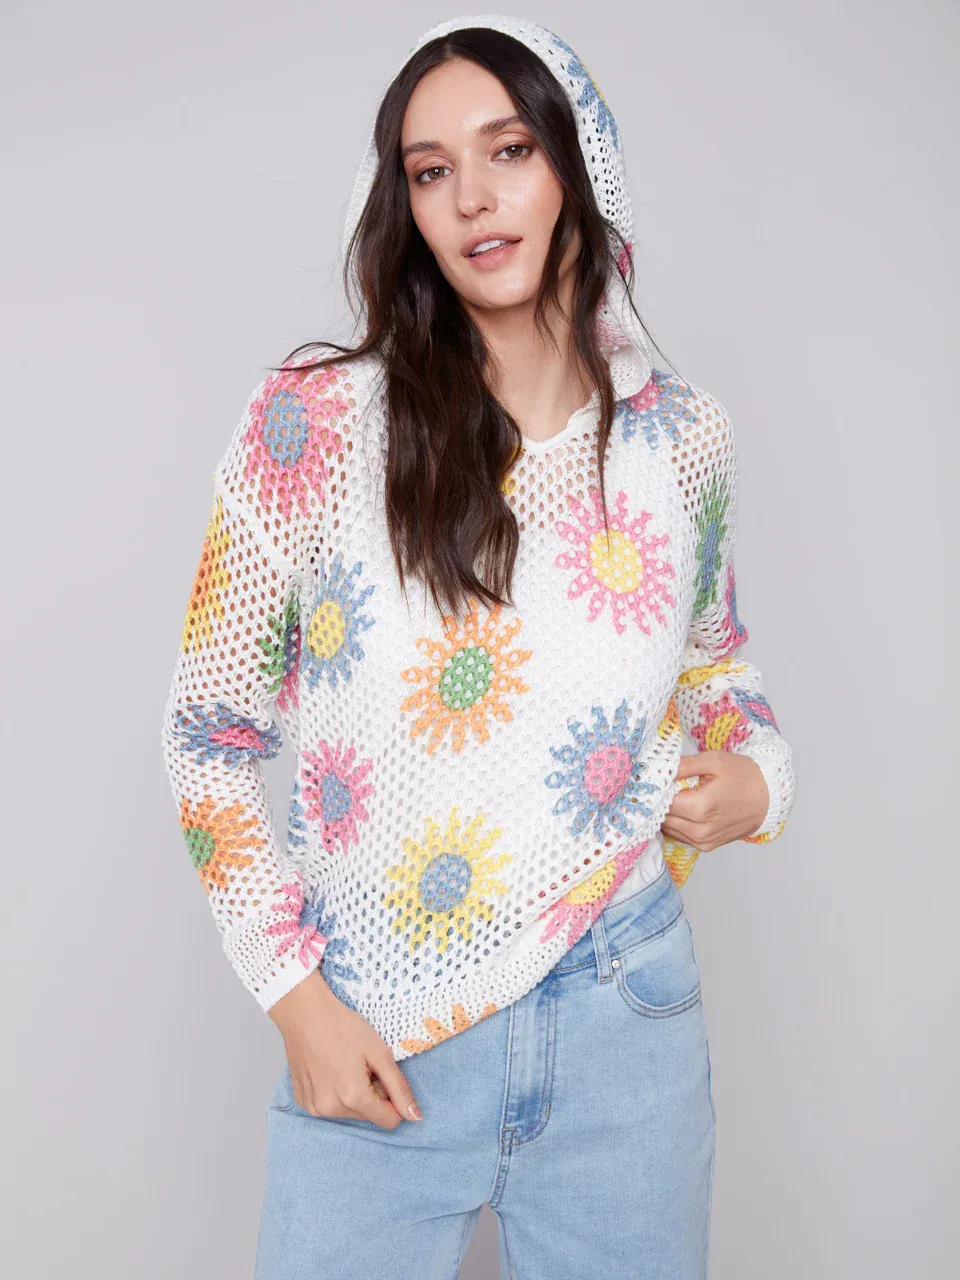 PRINTED FISHNET HOODIE SWEATER, Color: DAISIES, Size: XS